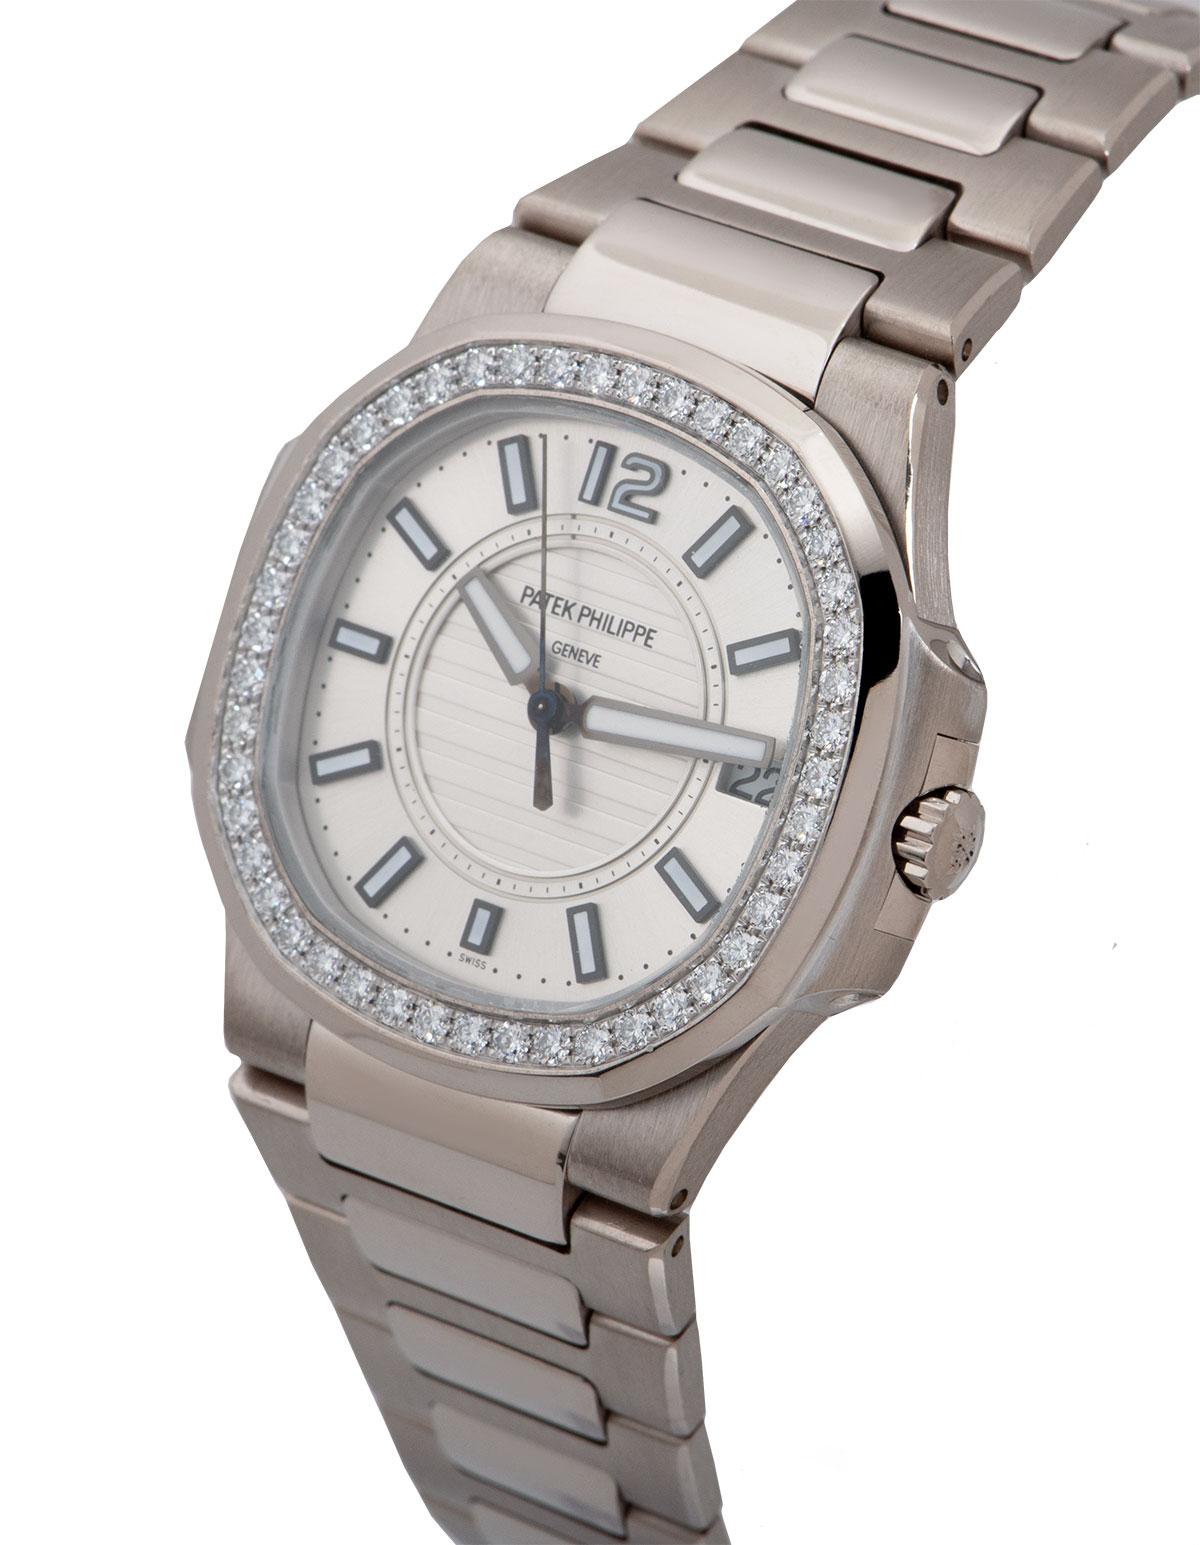 A 34 mm 18k White Gold Nautilus Ladies Wristwatch, silver dial with applied hour markers and applied arabic number 12, date at 3 0'clock, a fixed 18k white gold bezel set with 46 round brilliant cut diamonds (~0.77ct), an 18k white gold bracelet